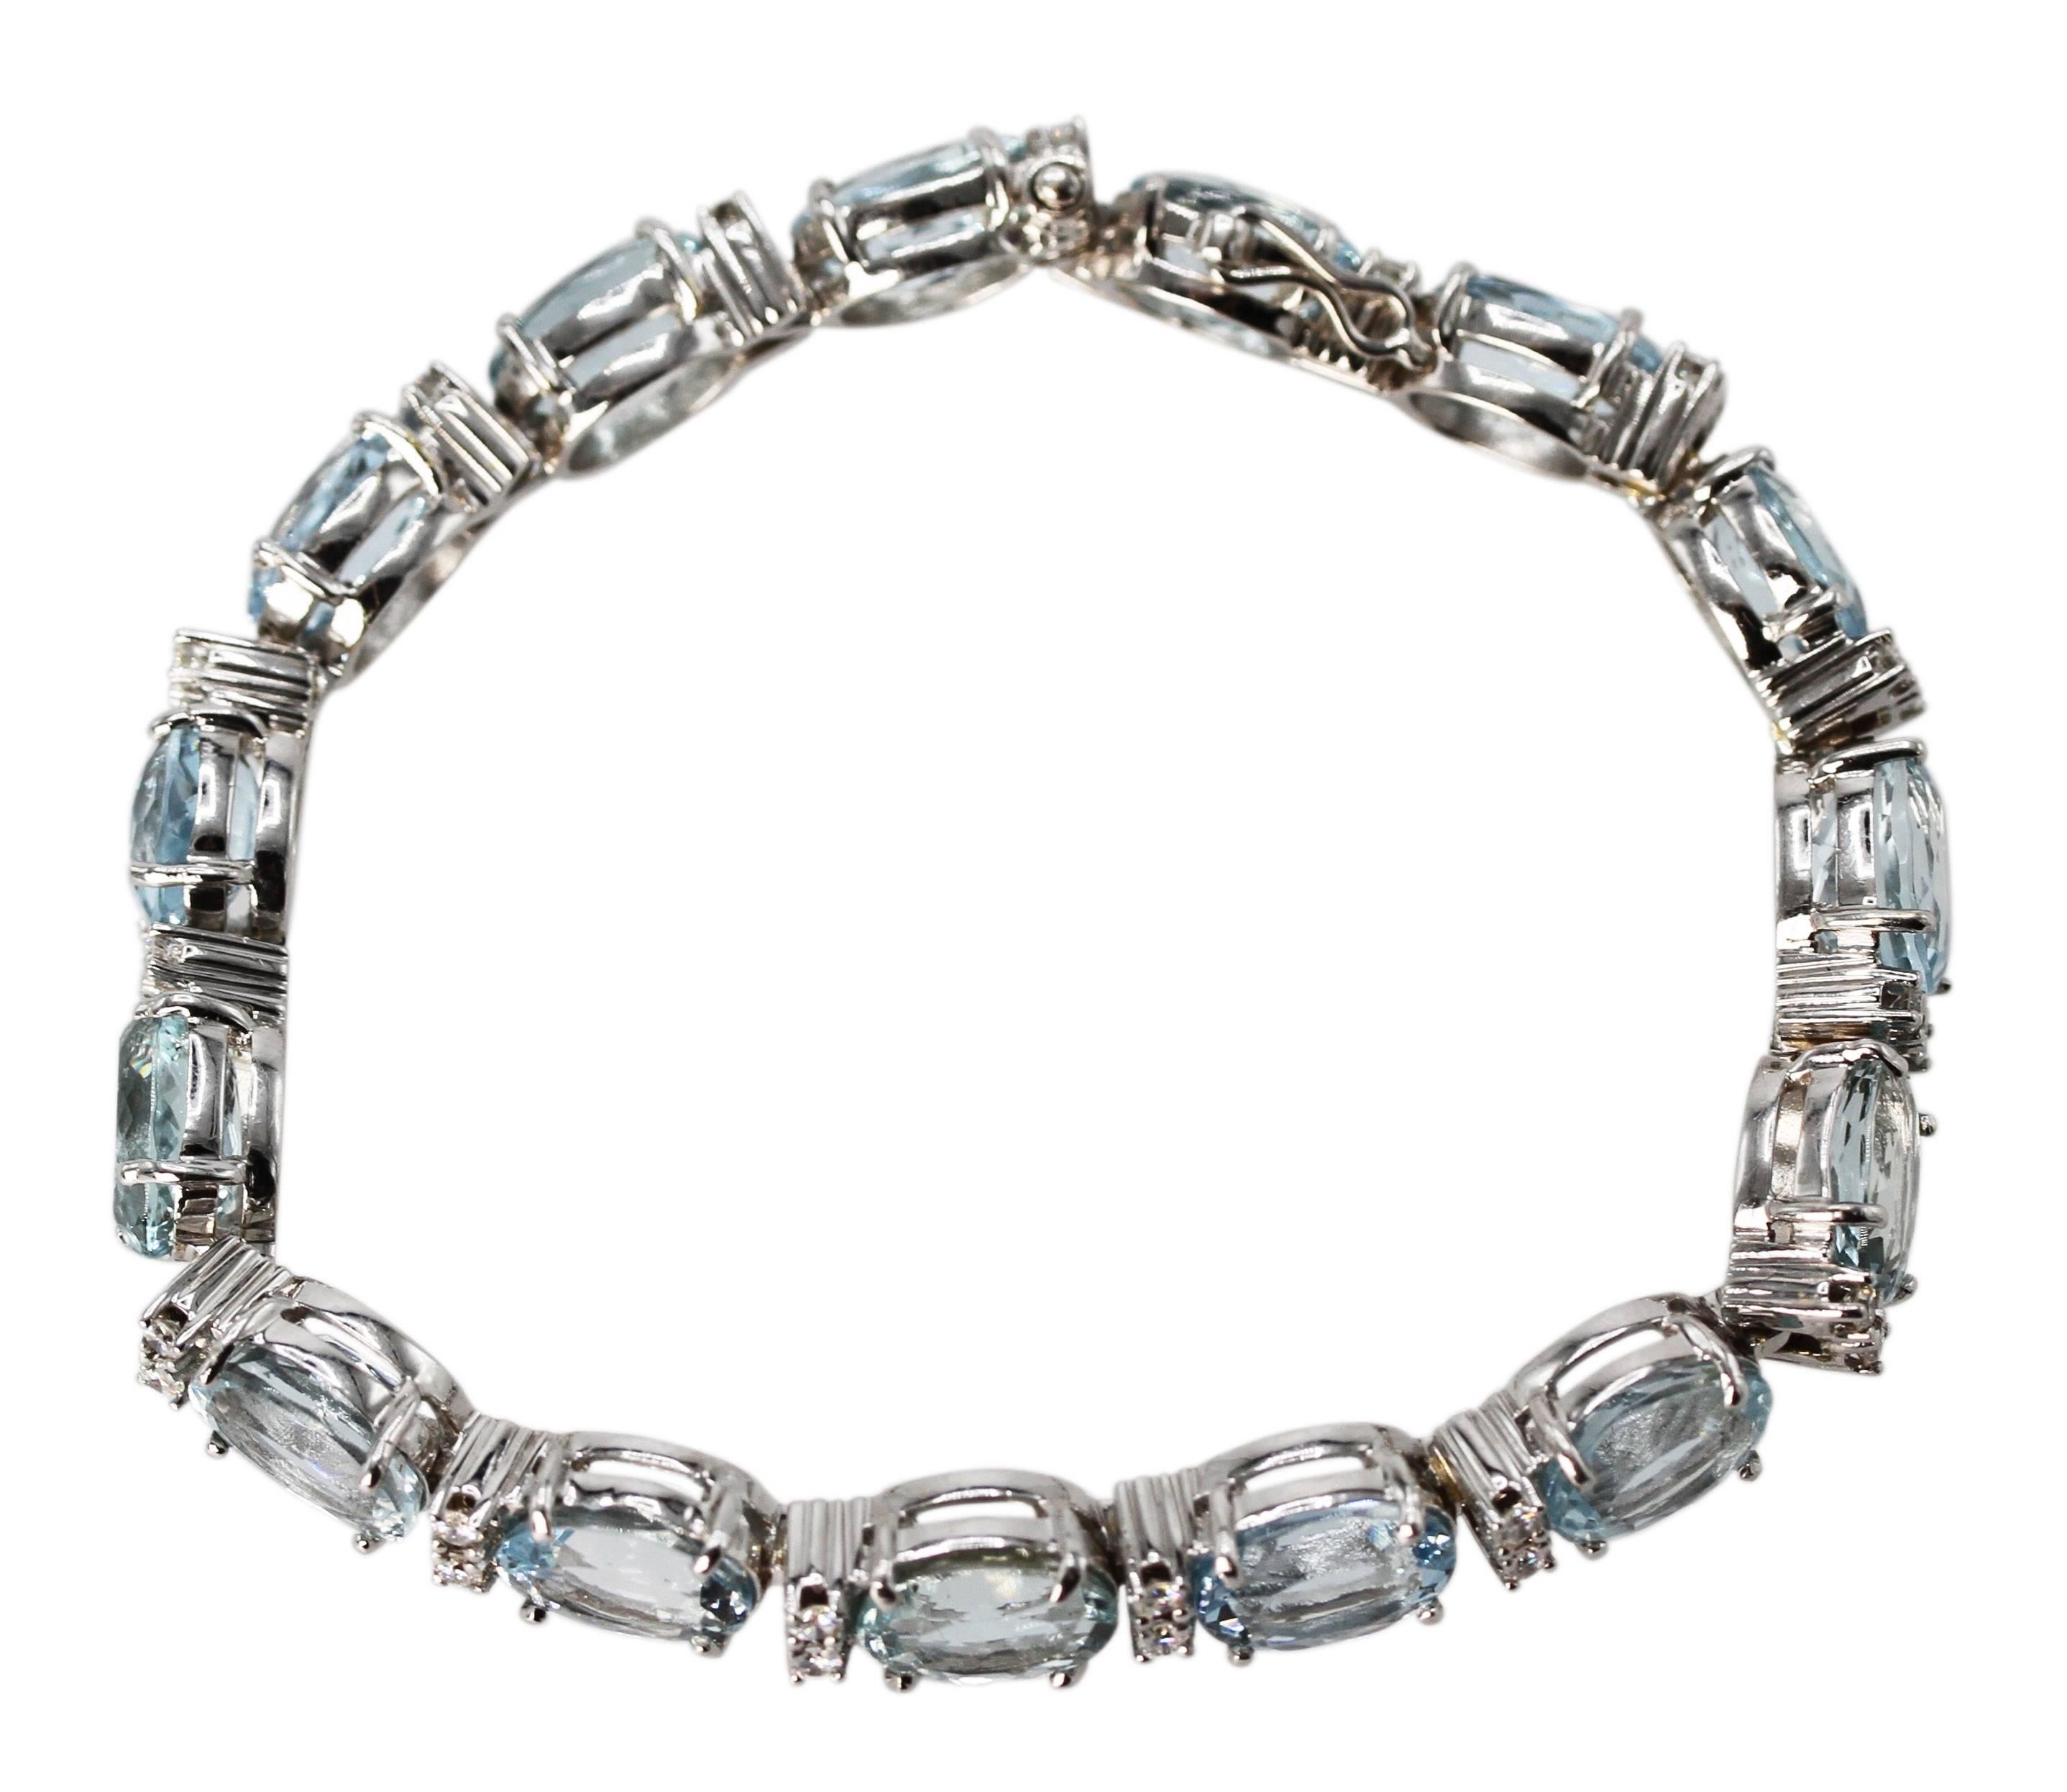 18 Karat White Gold, Aquamarine and Diamond Straight Line Bracelet
• Stamped 750
• 15 oval aquamarines weighing approximately 30.00 carats
• 30 round diamonds weighing approximately 1.00 carat
• Length 7 1/4 inches, width 1/4 inch, gross weight 29.3